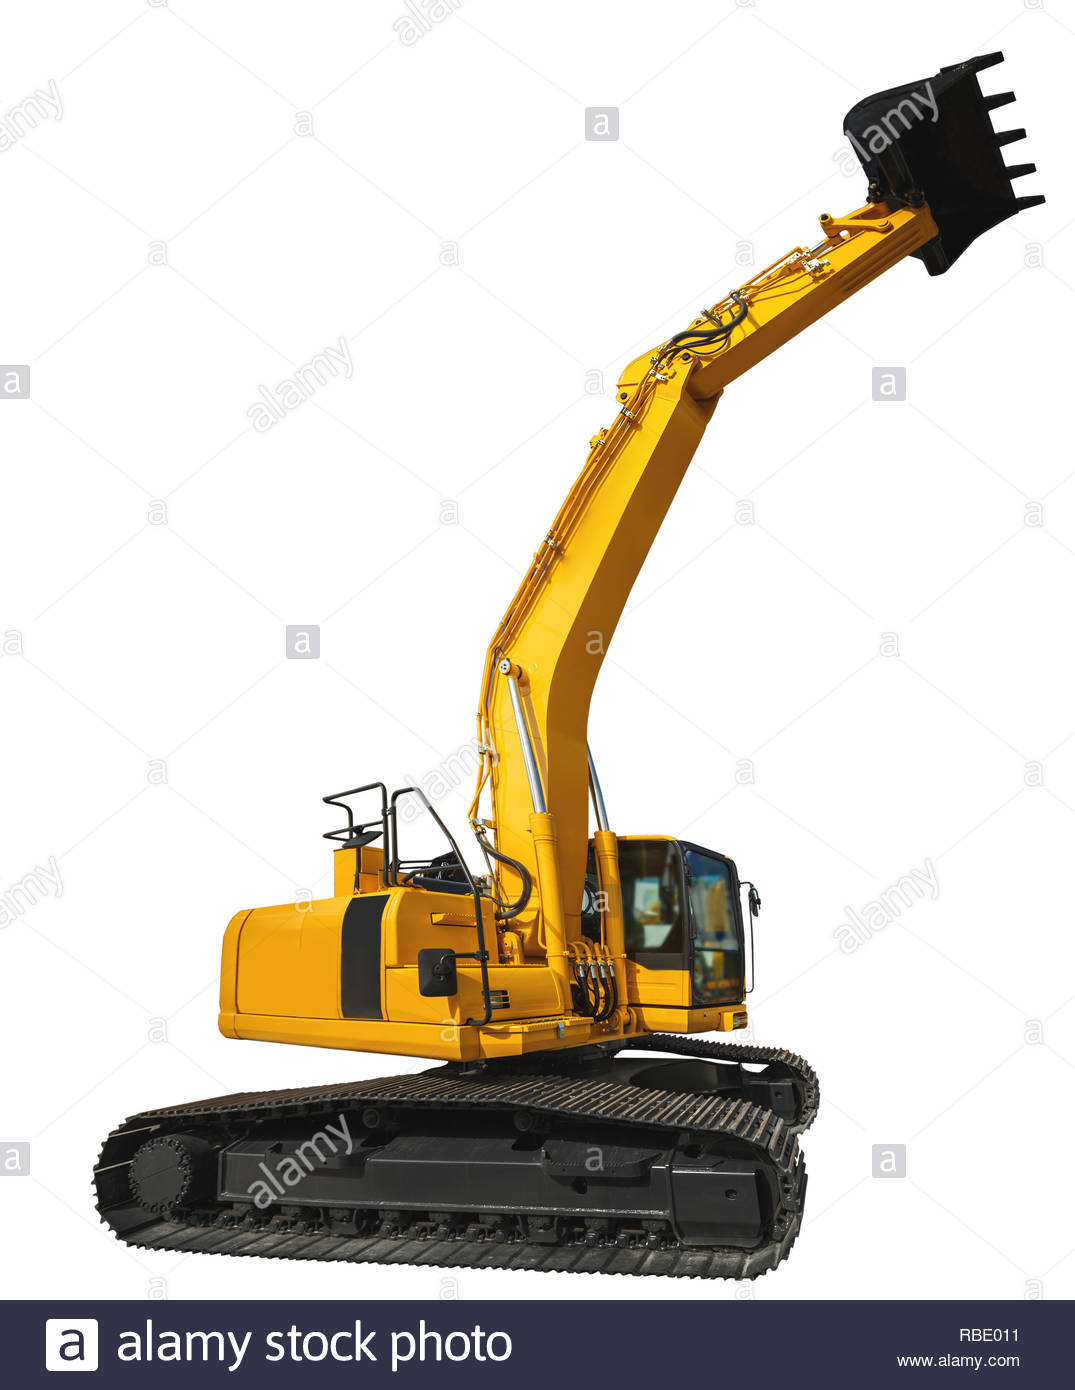 Excavator Loader And Bucket With Clipping Path Isolated Over White